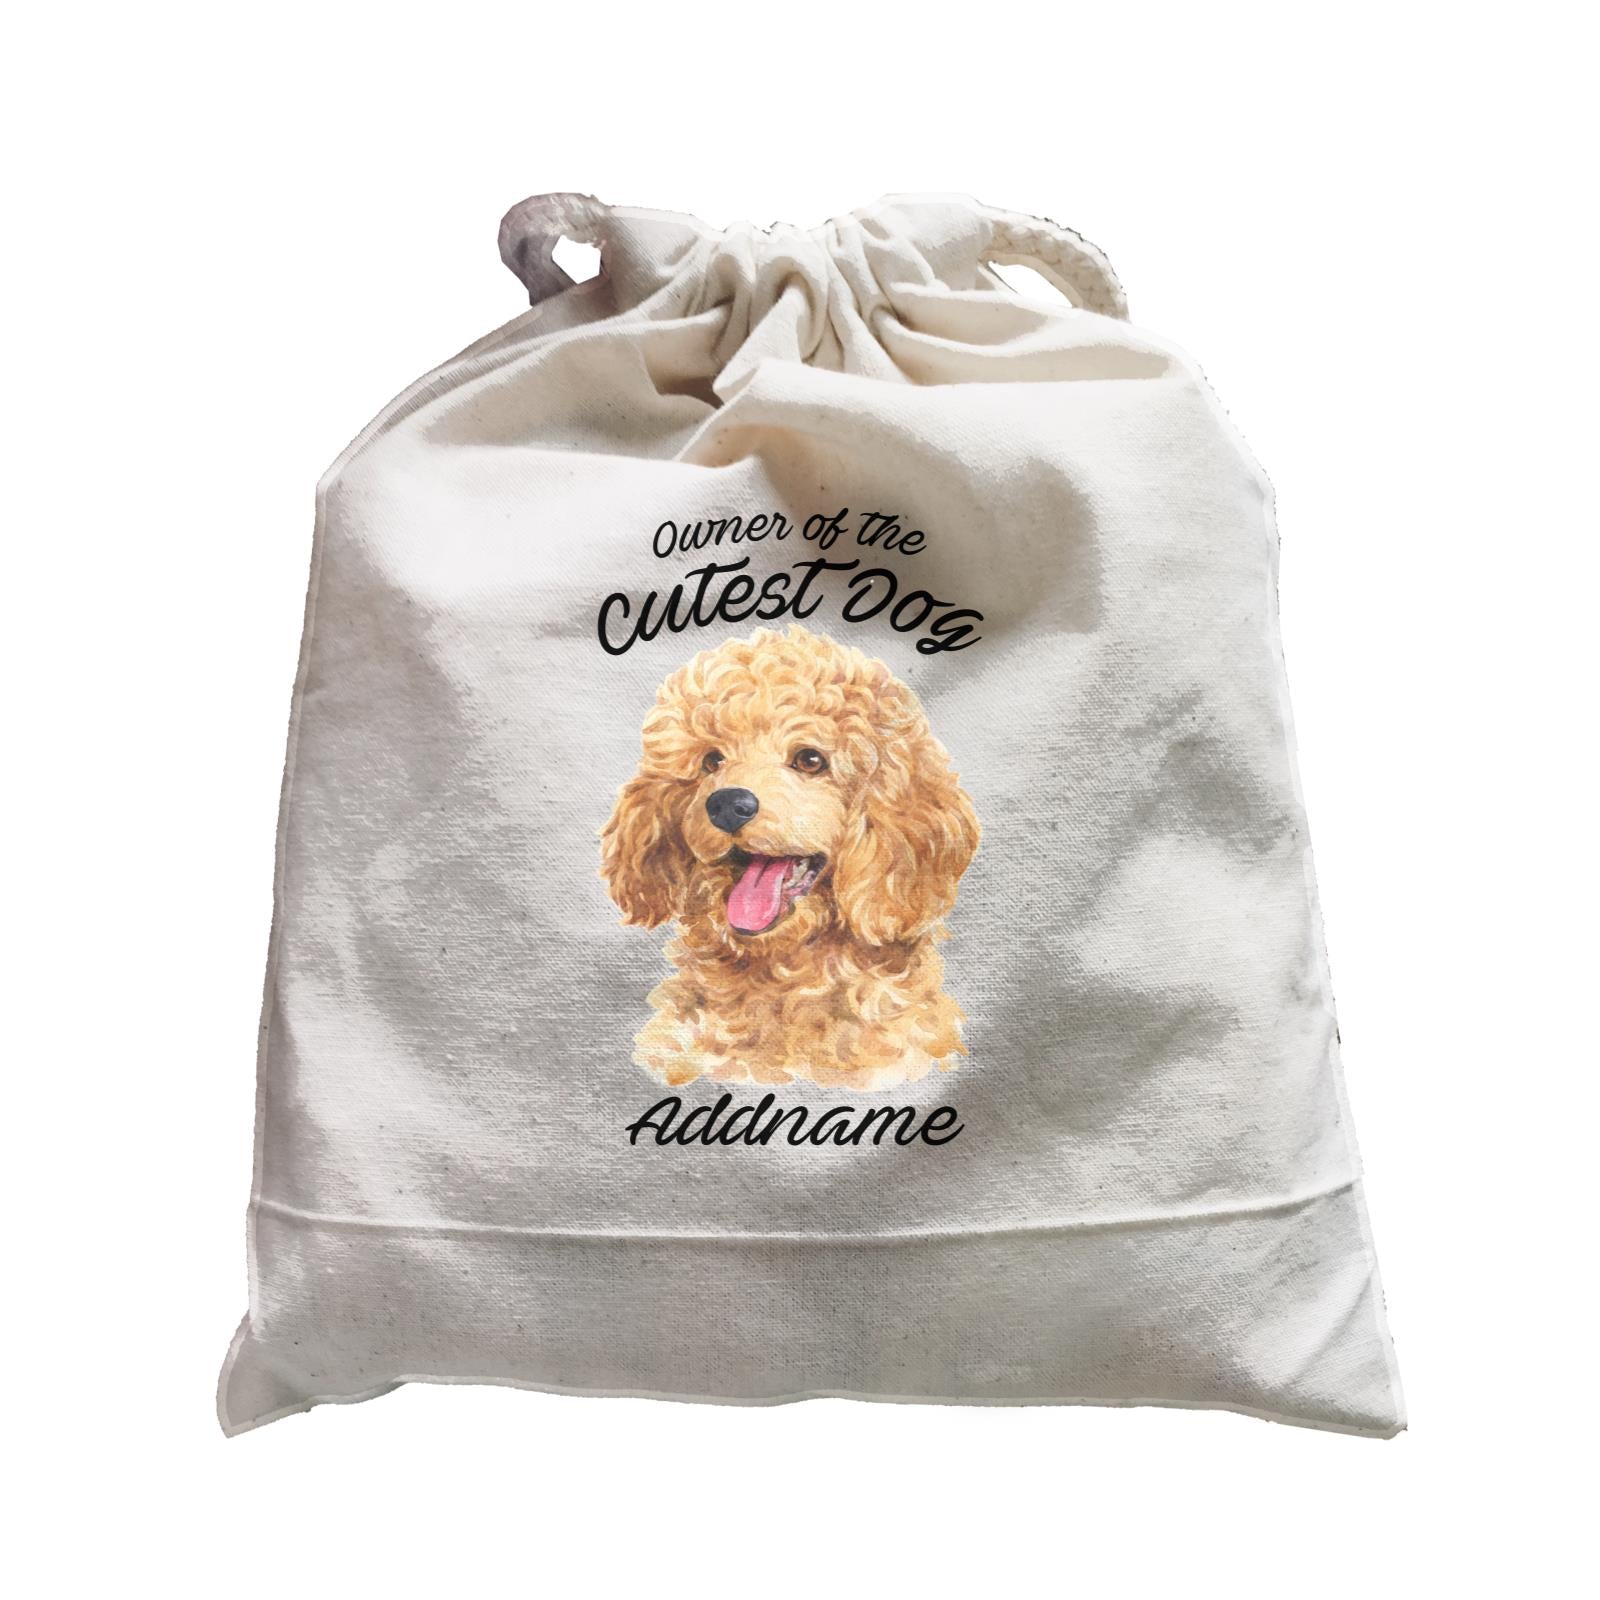 Watercolor Dog Owner Of The Cutest Dog Poodle Gold Addname Satchel